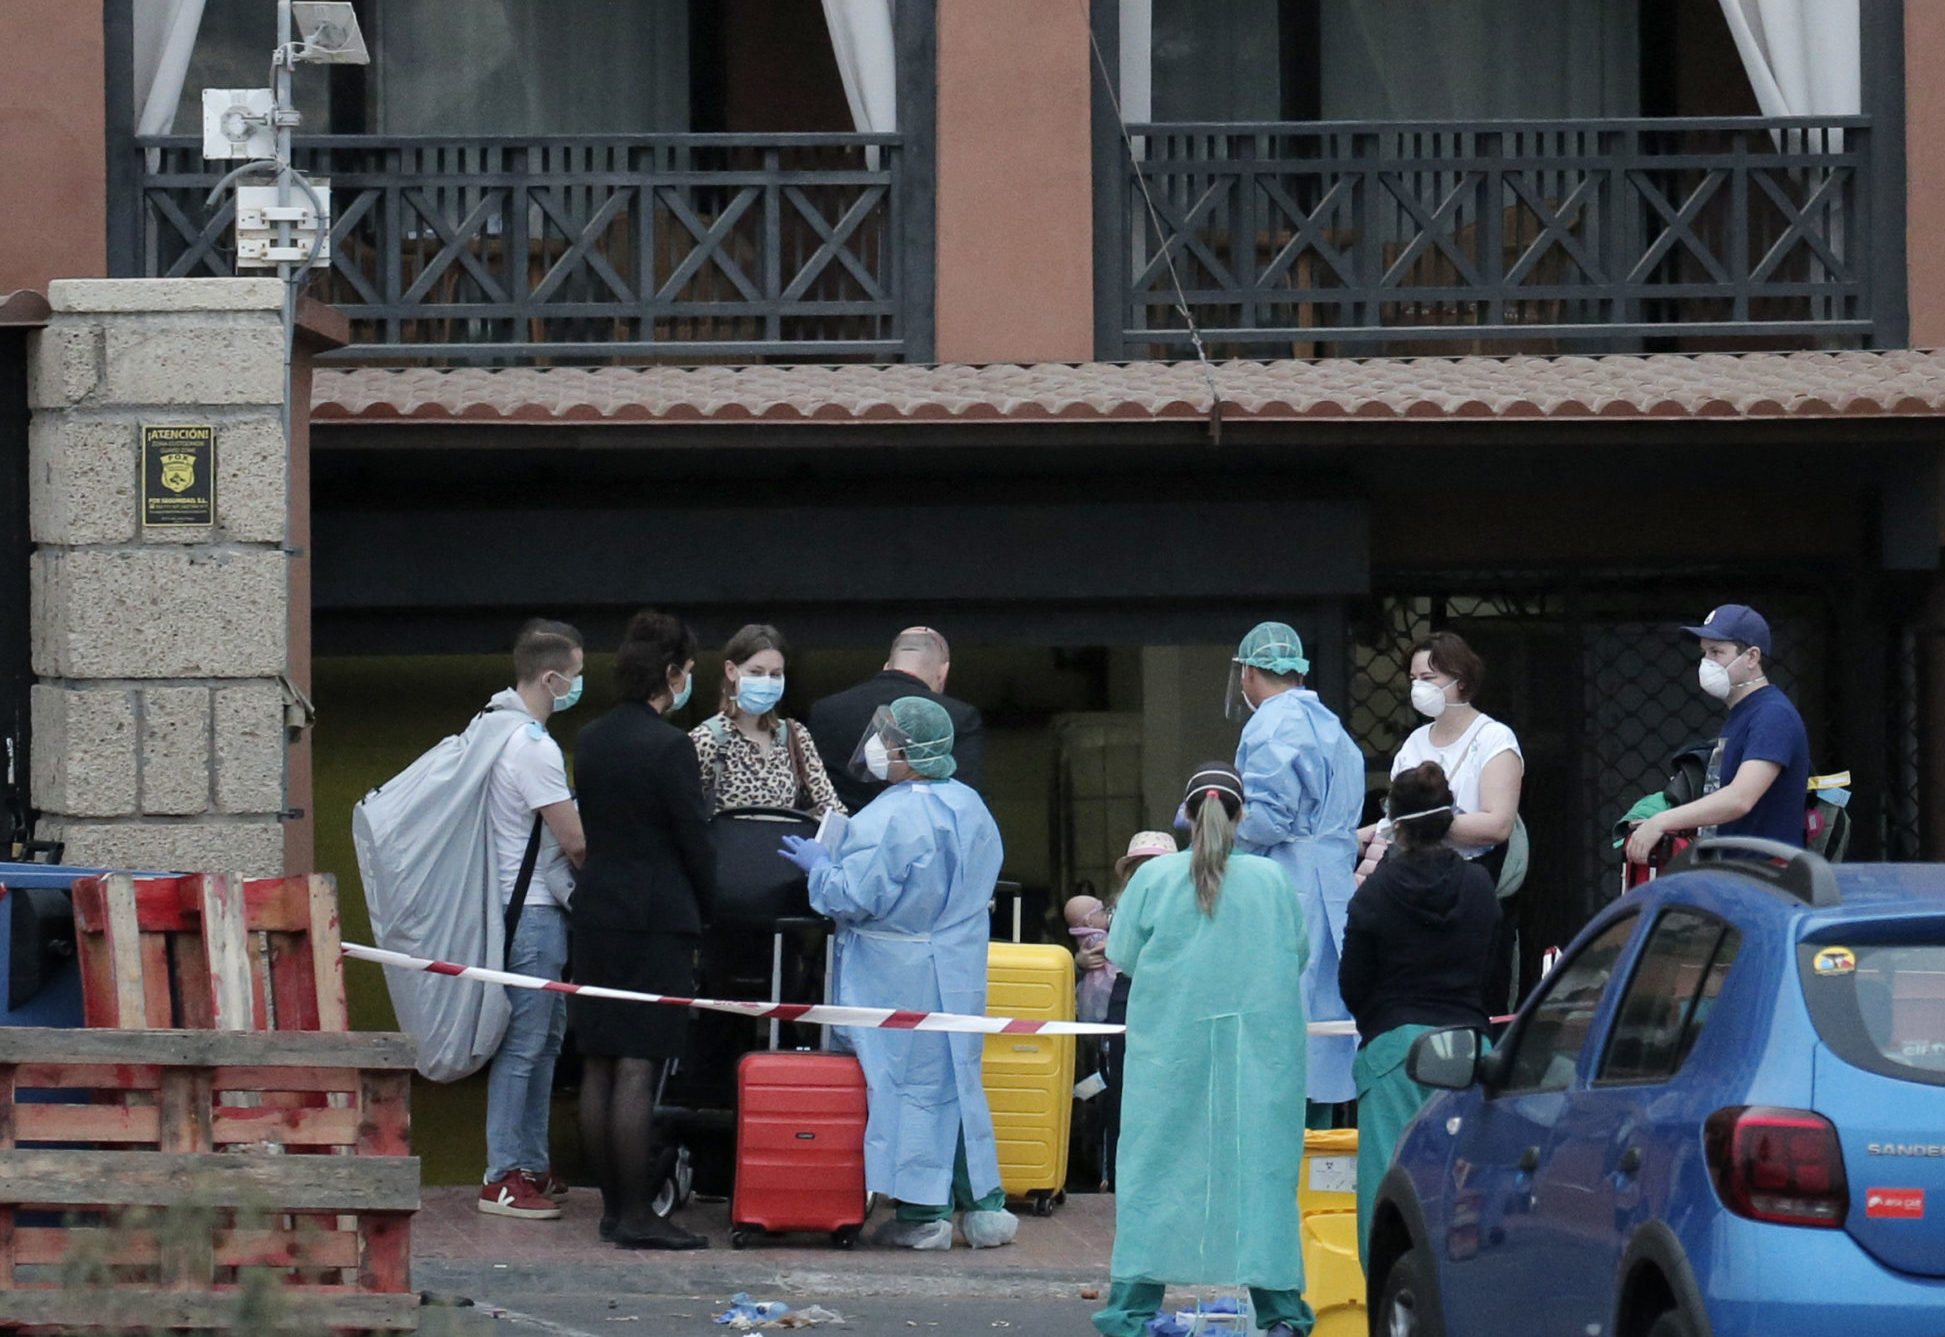 Health workers help guests leave the H10 Costa Adeje Palace hotel in Tenerife which has been under lockdown since an outbreak of coronavirus at the resort